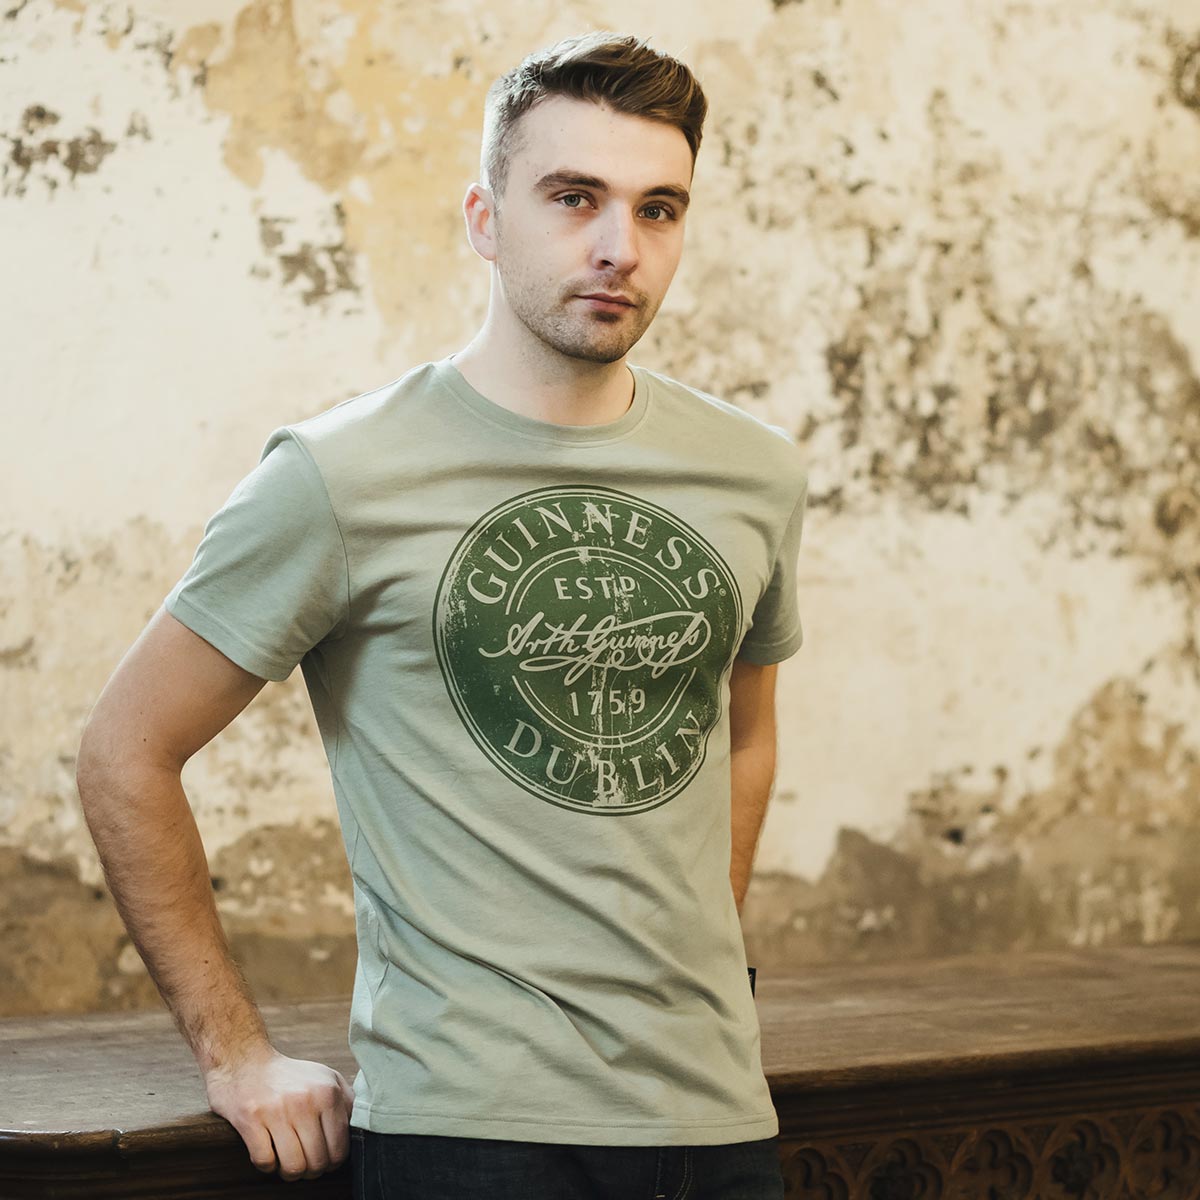 A man wearing a Guinness cotton blend green t-shirt leaning against a wall.